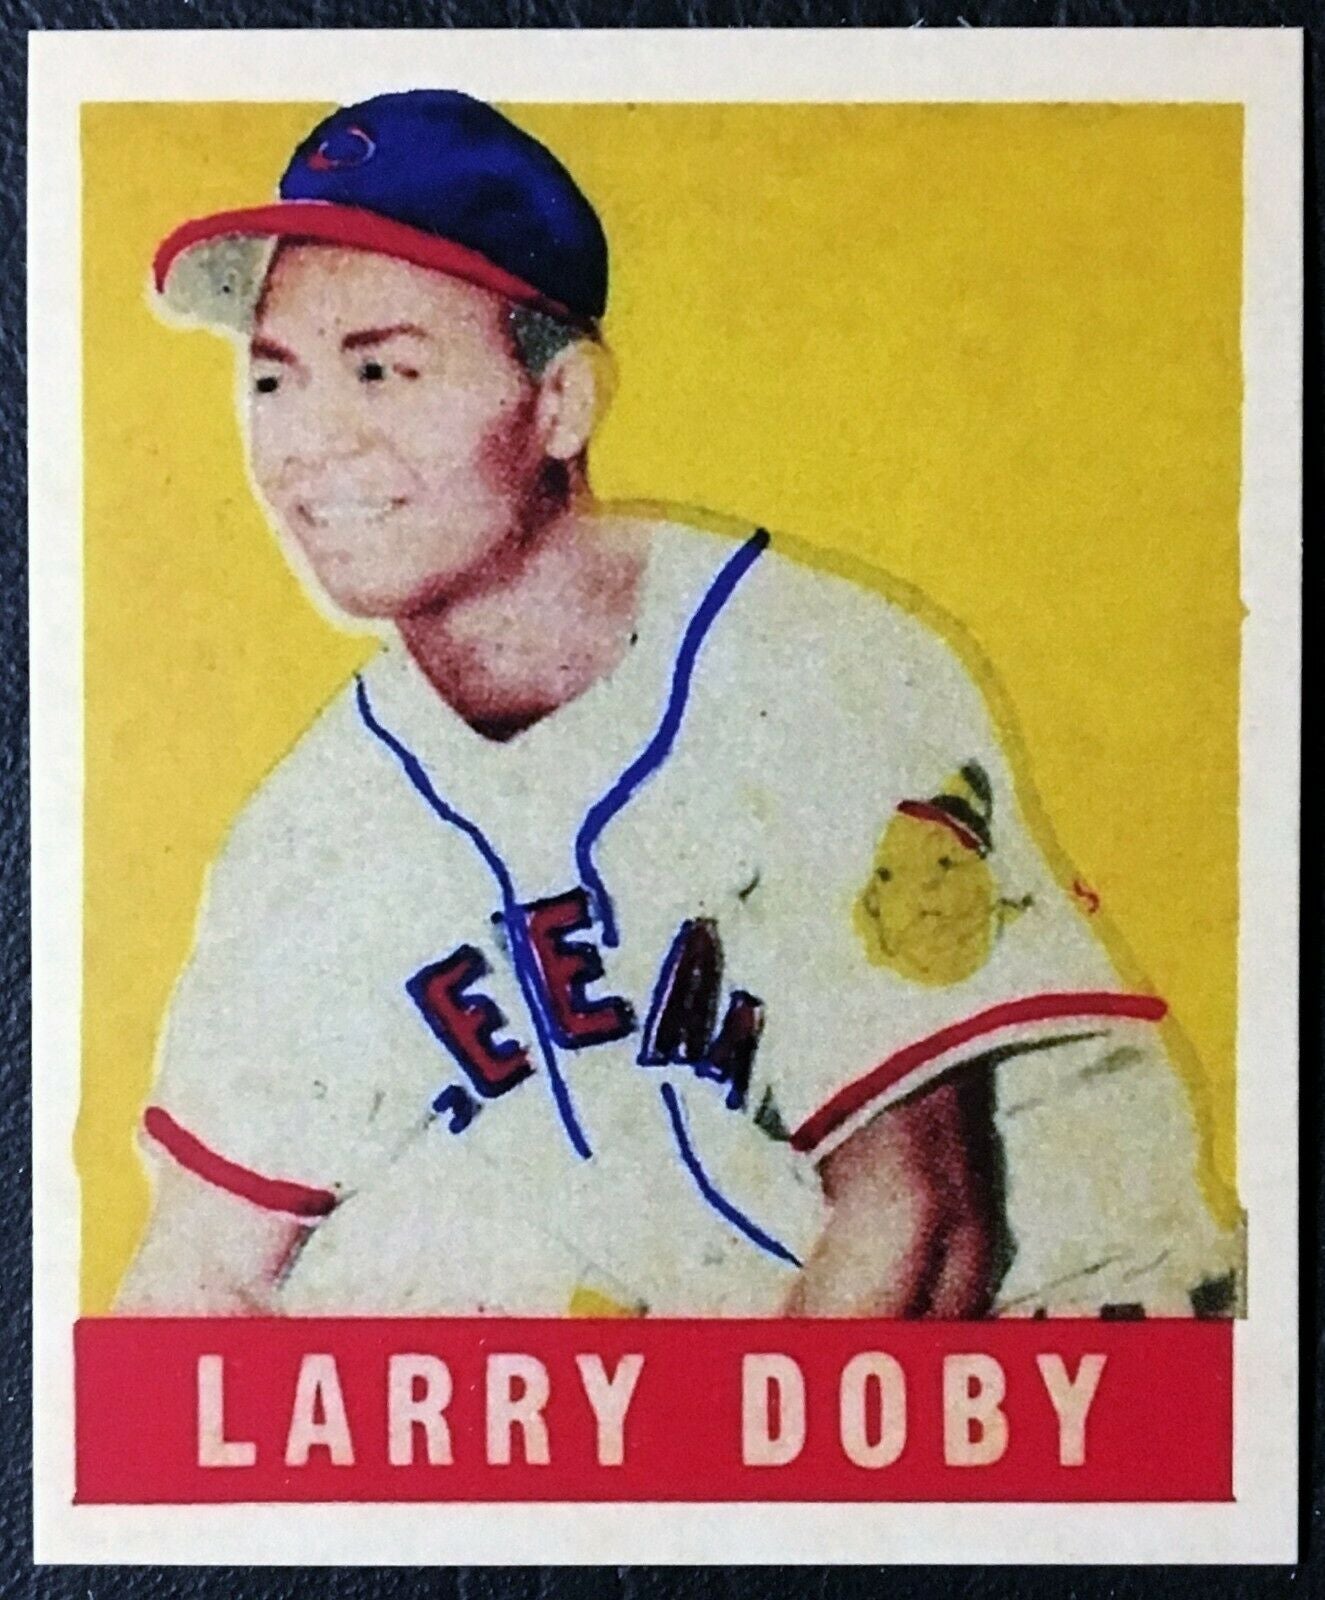 1948 LEAF #138 LARRY DOBY CLEVELAND INDIANS ROOKIE REPRINT CARD